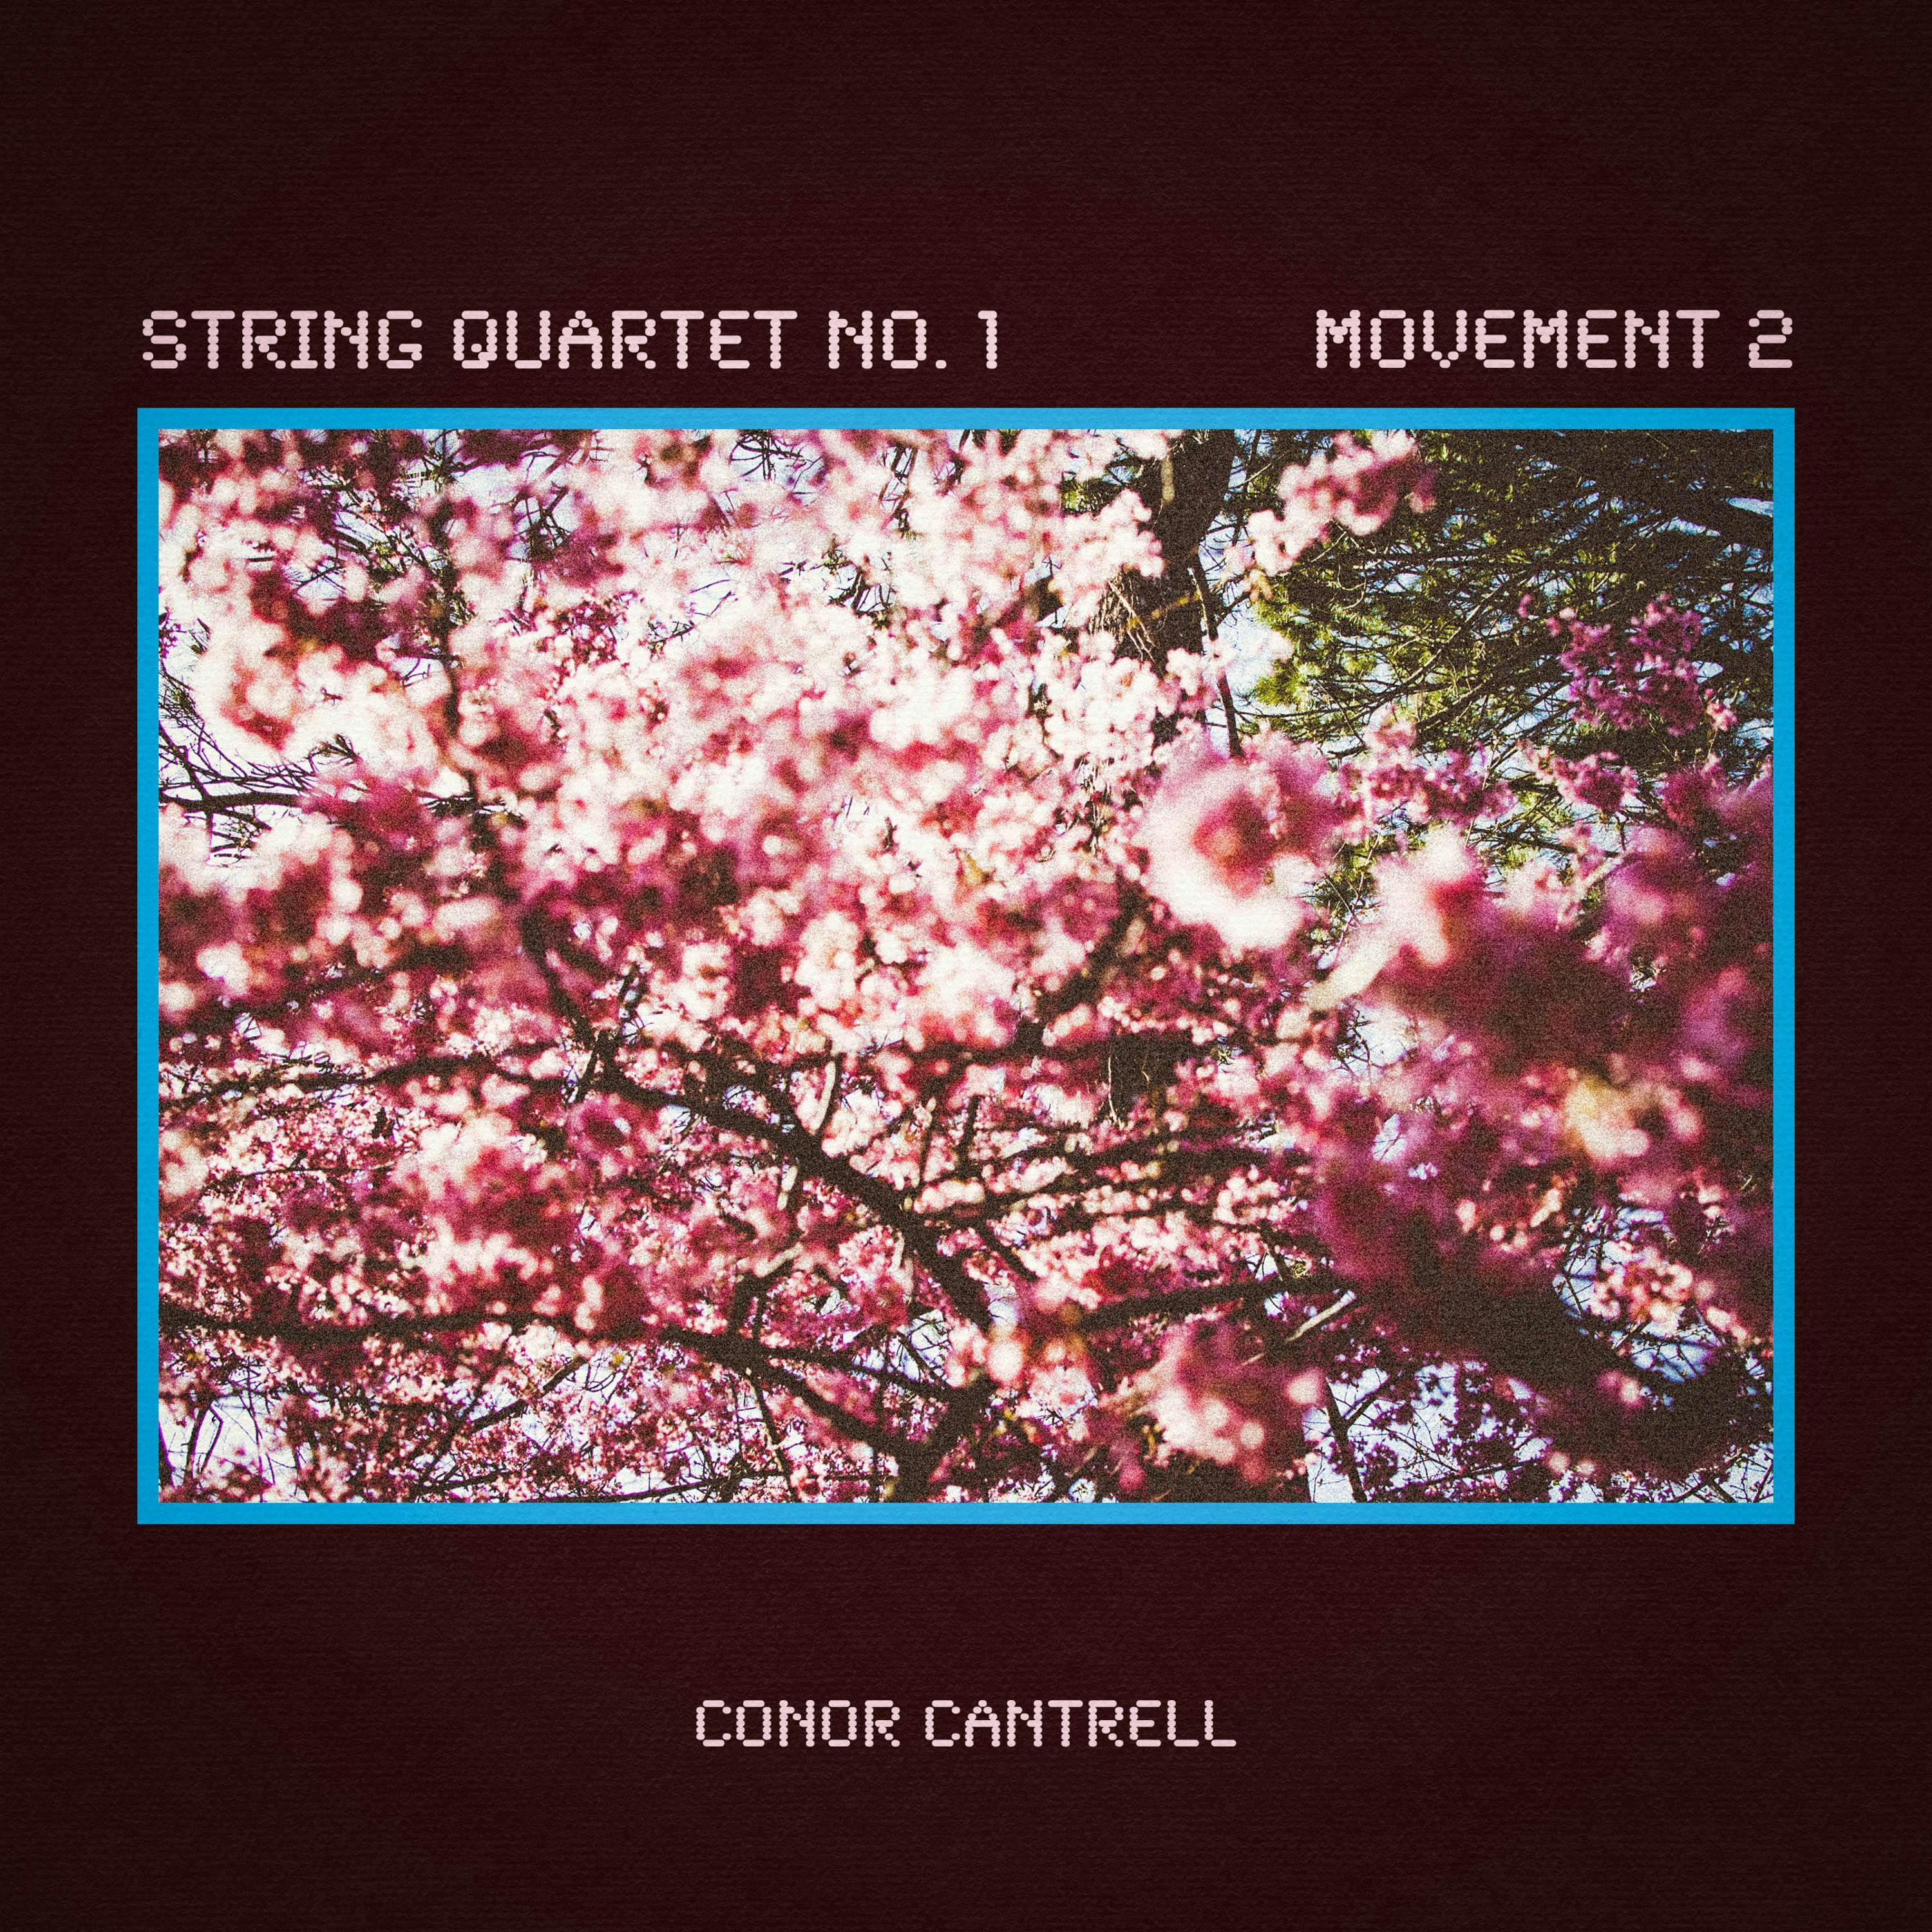 Cover art for String Quartet No. 1, Movement 2 by Conor Cantrell